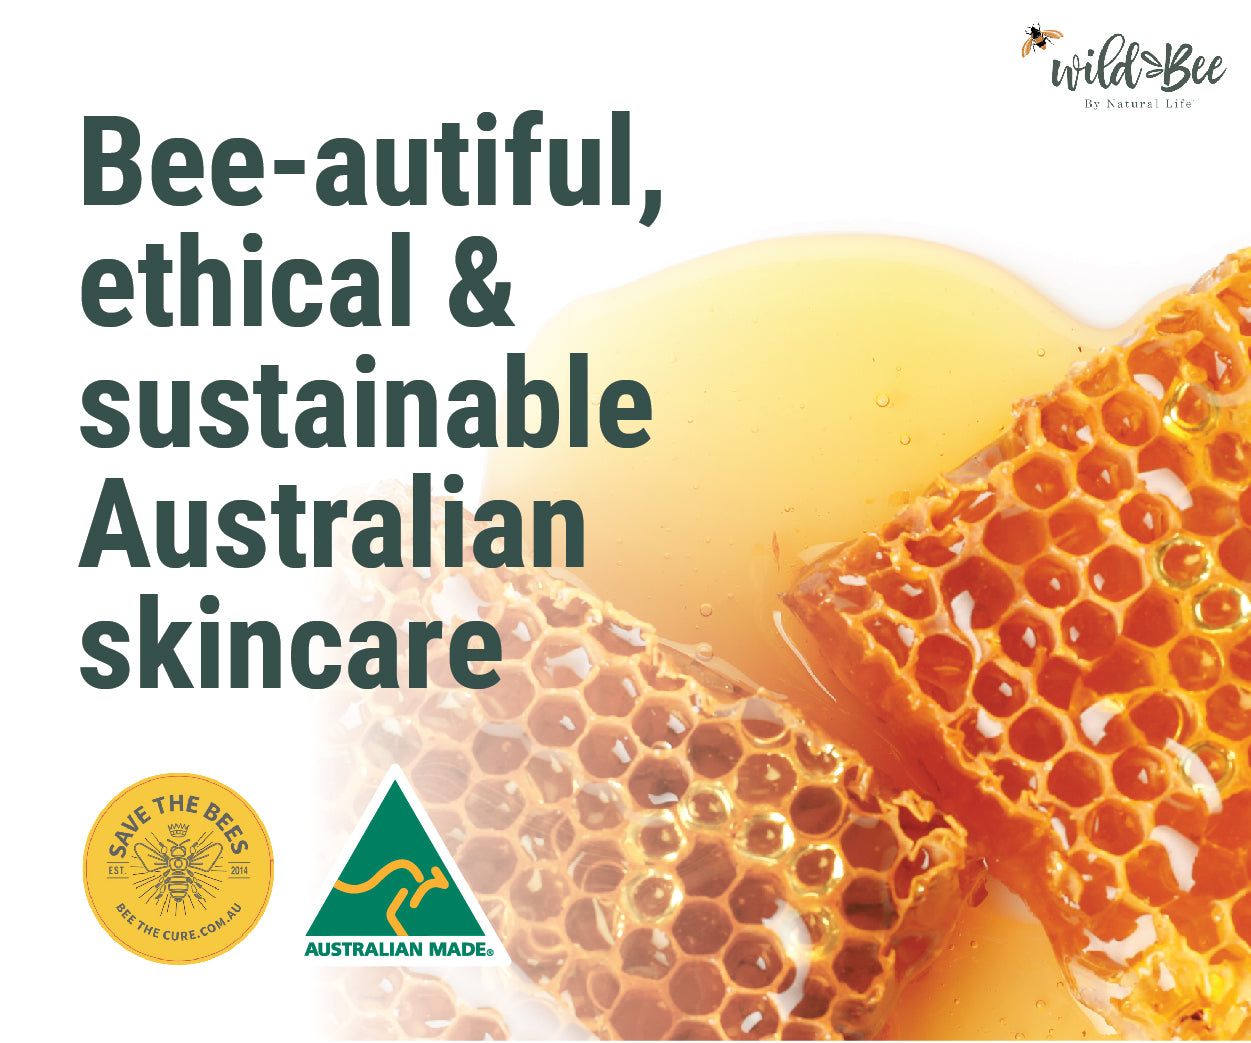 Beautiful, rich blends of natural Australian extracts and nourishing bee ingredients lovingly created to care for your skin.